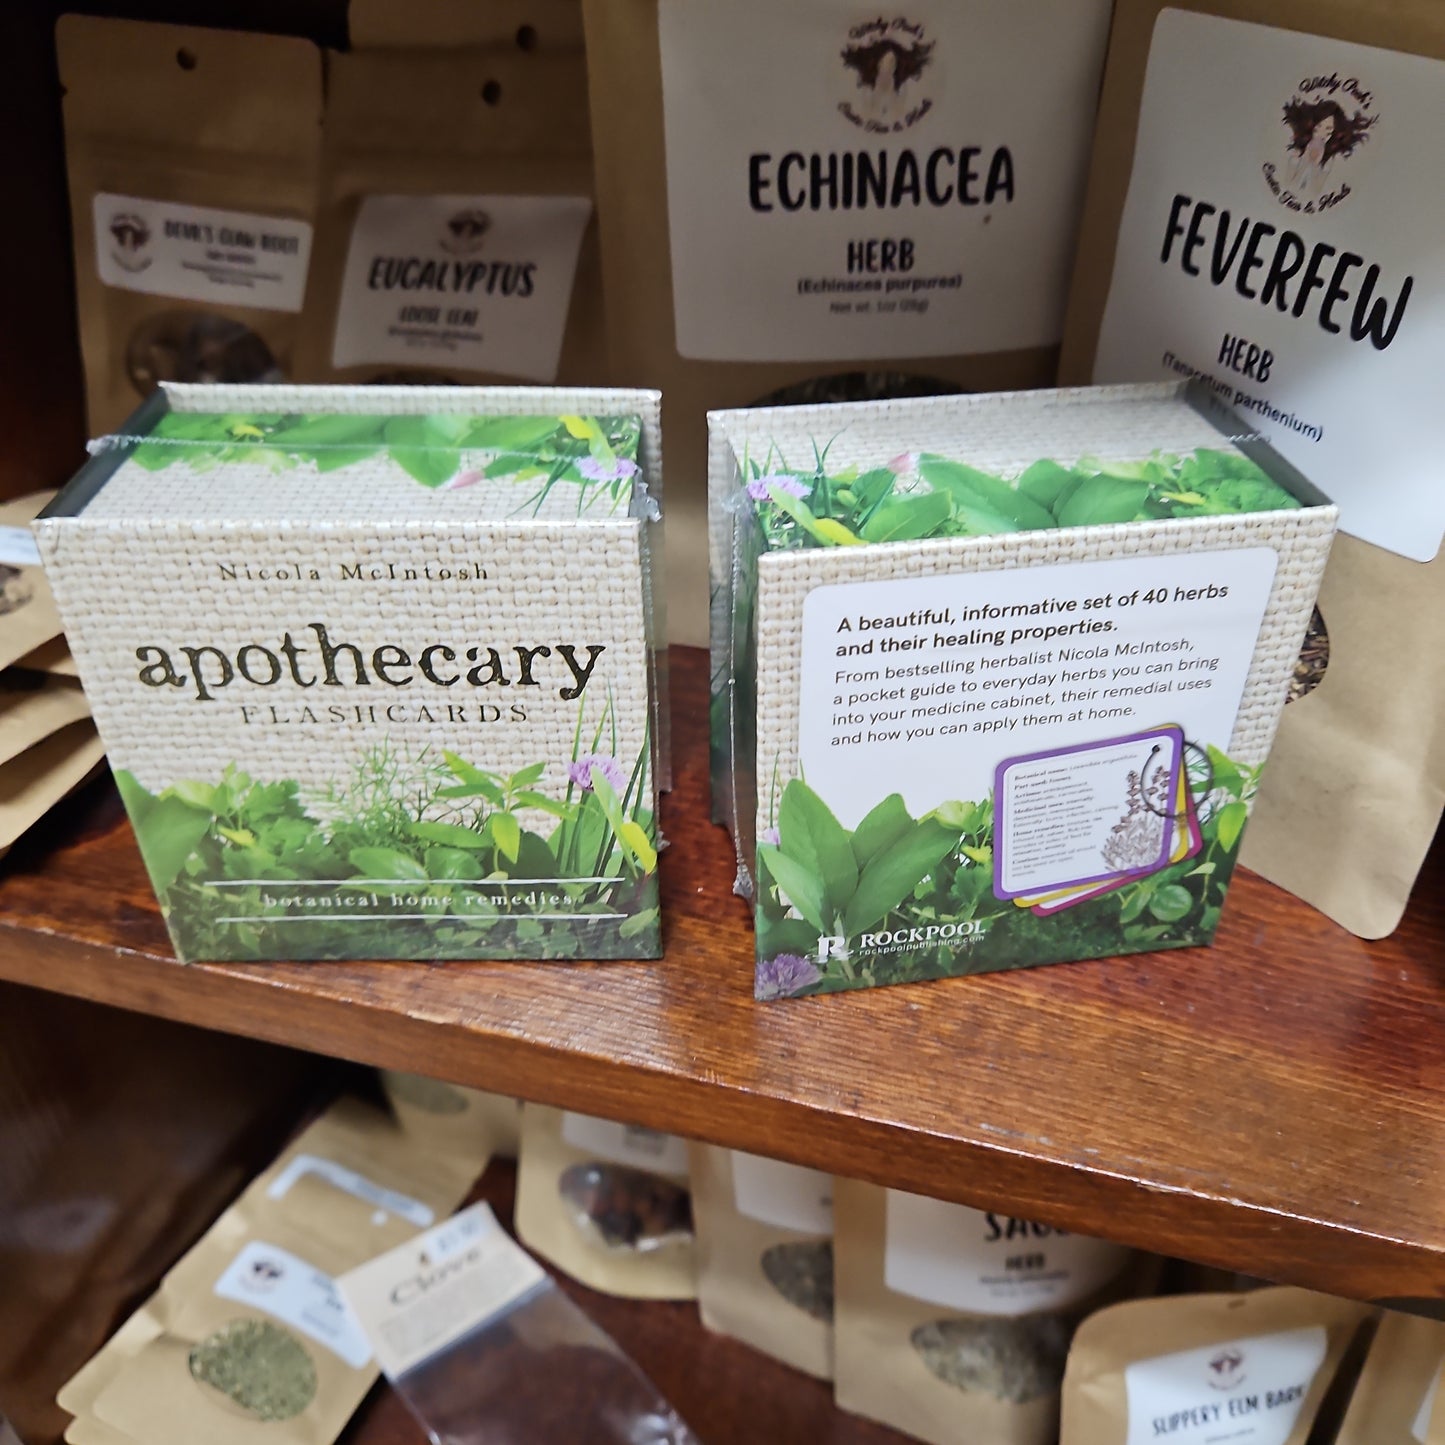 Apothecary Flashcards: A Pocket Reference For Herbs